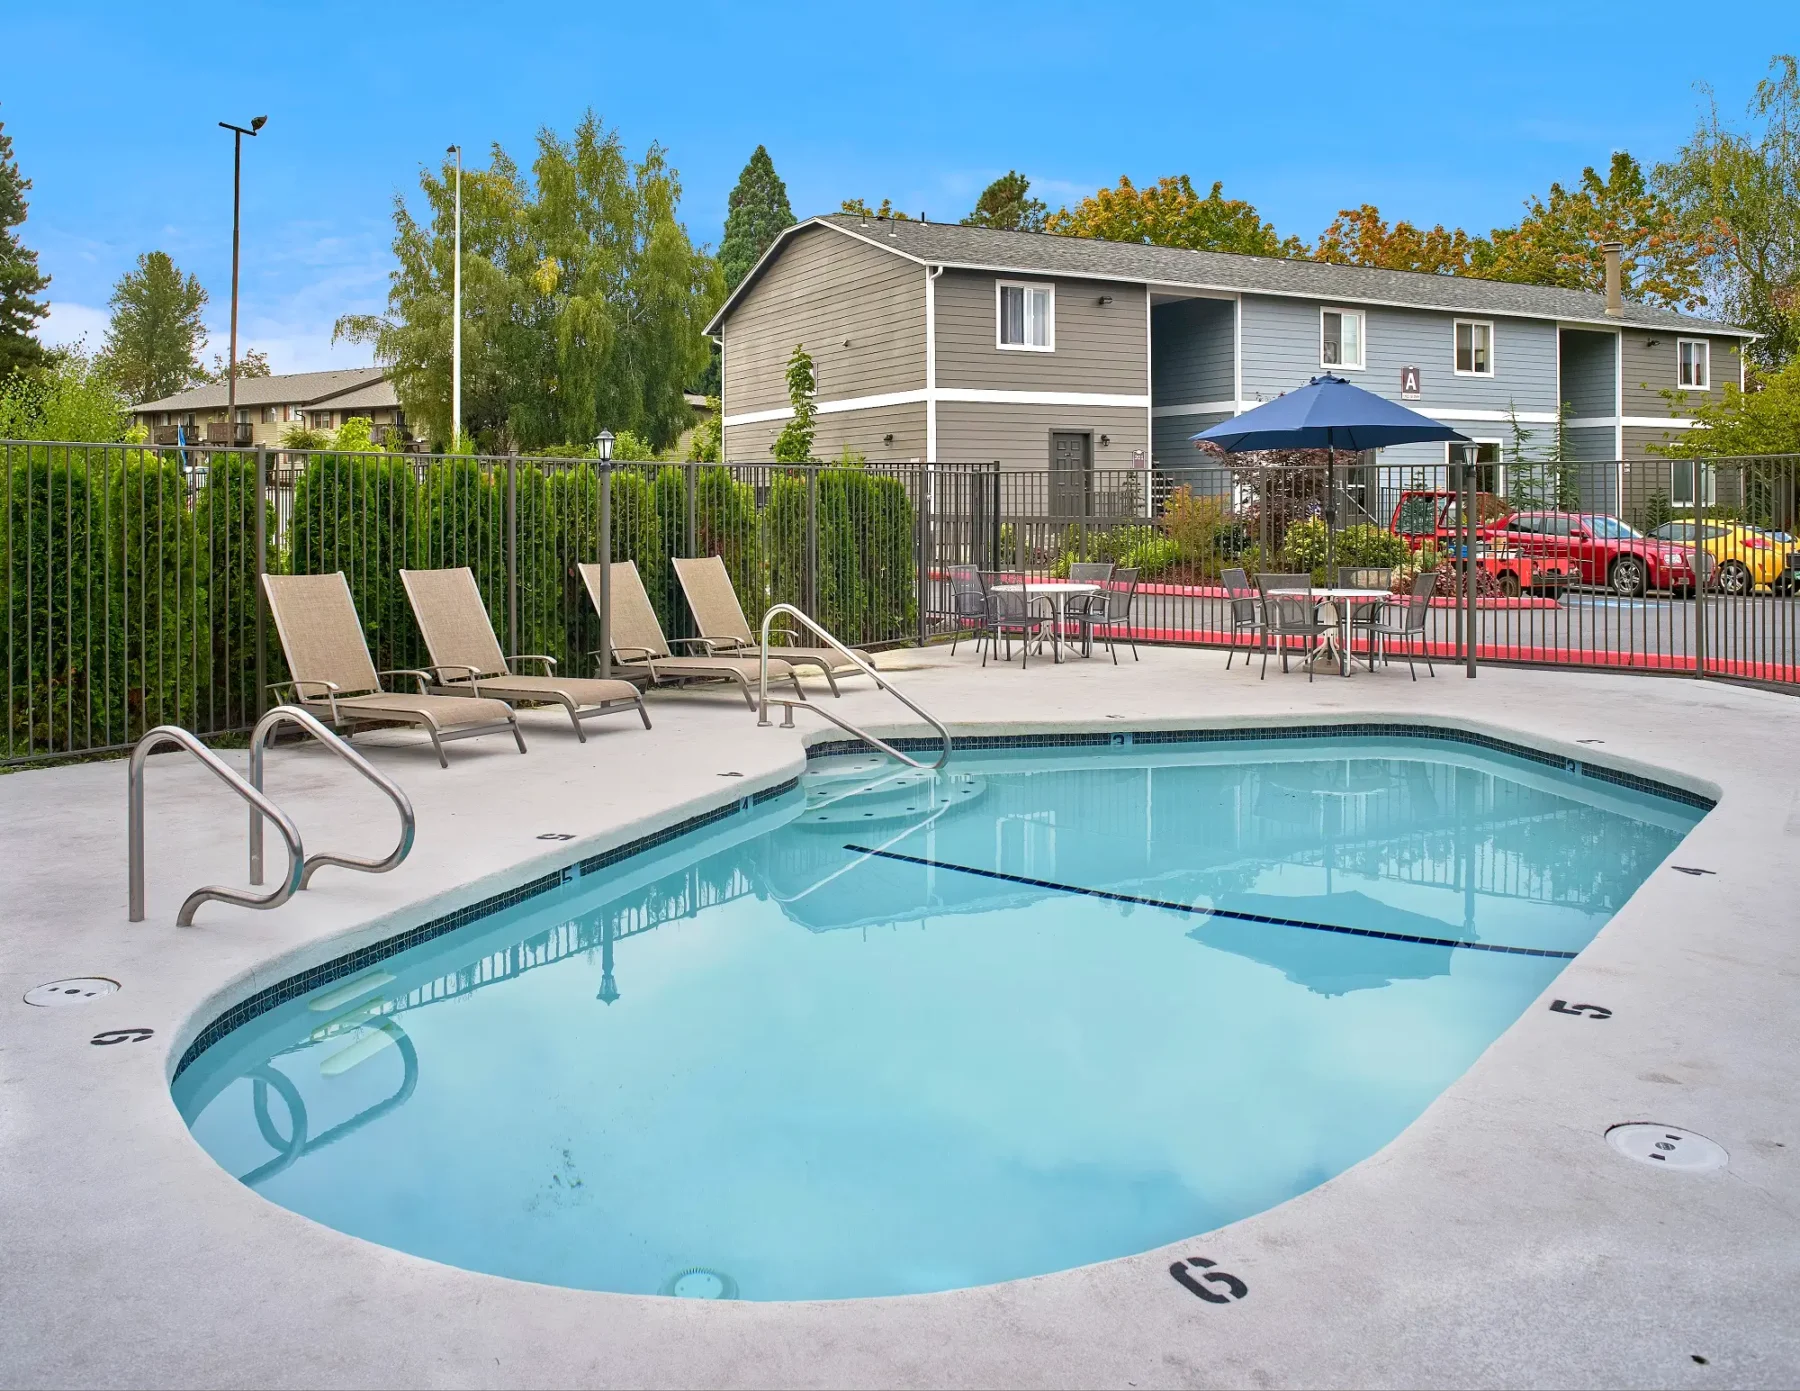 Irwin park outdoor pool with lounge poolside seating and tables.